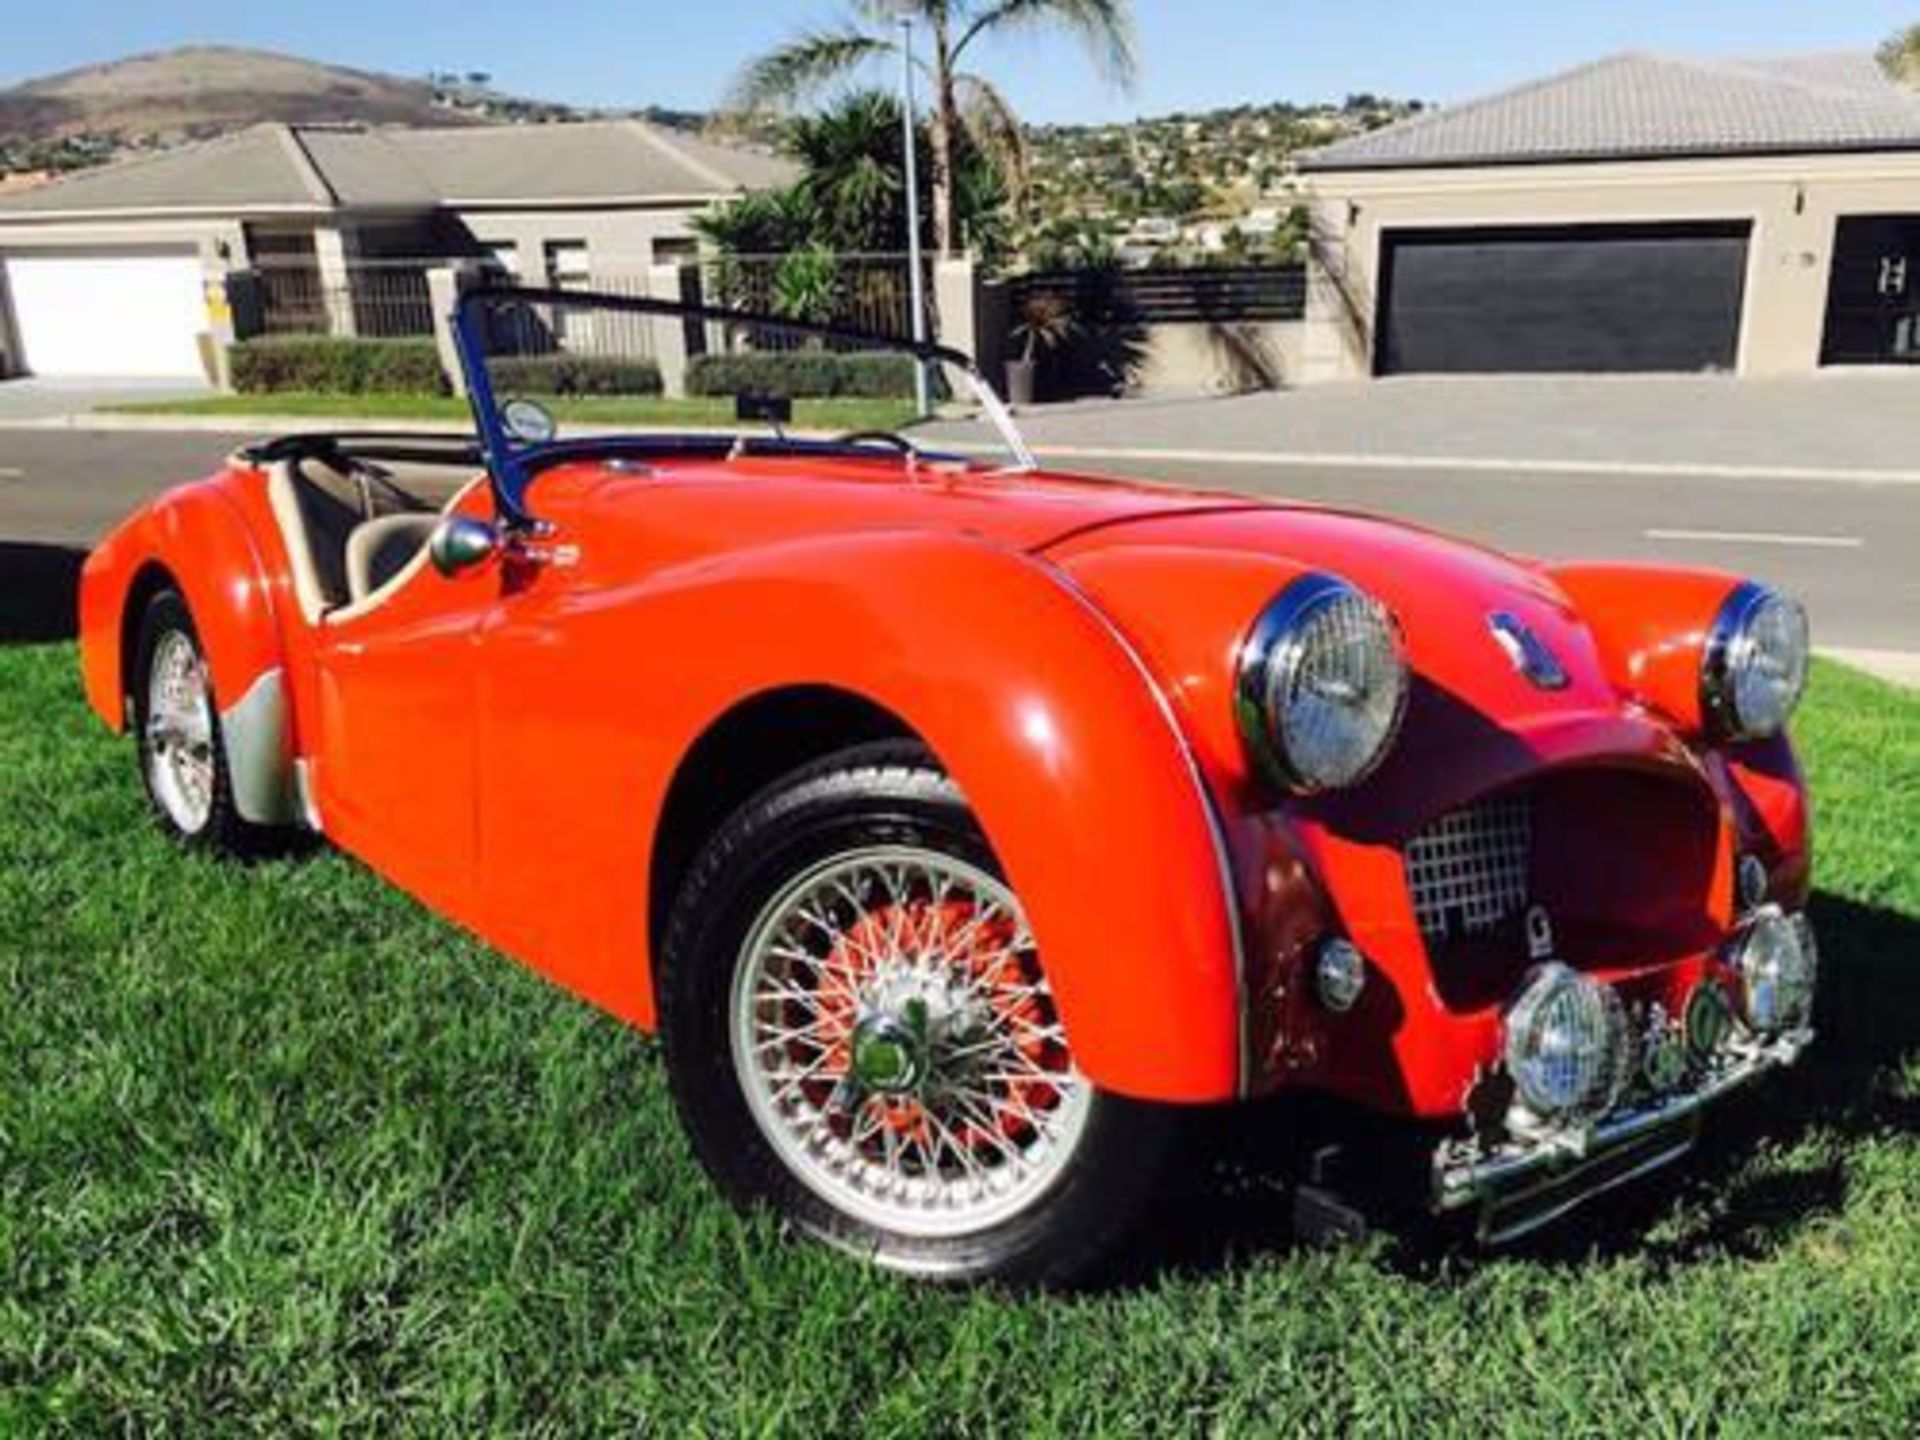 1954 Triumph TR2 Roadster Complete With Hard Top {053693} - Image 3 of 18